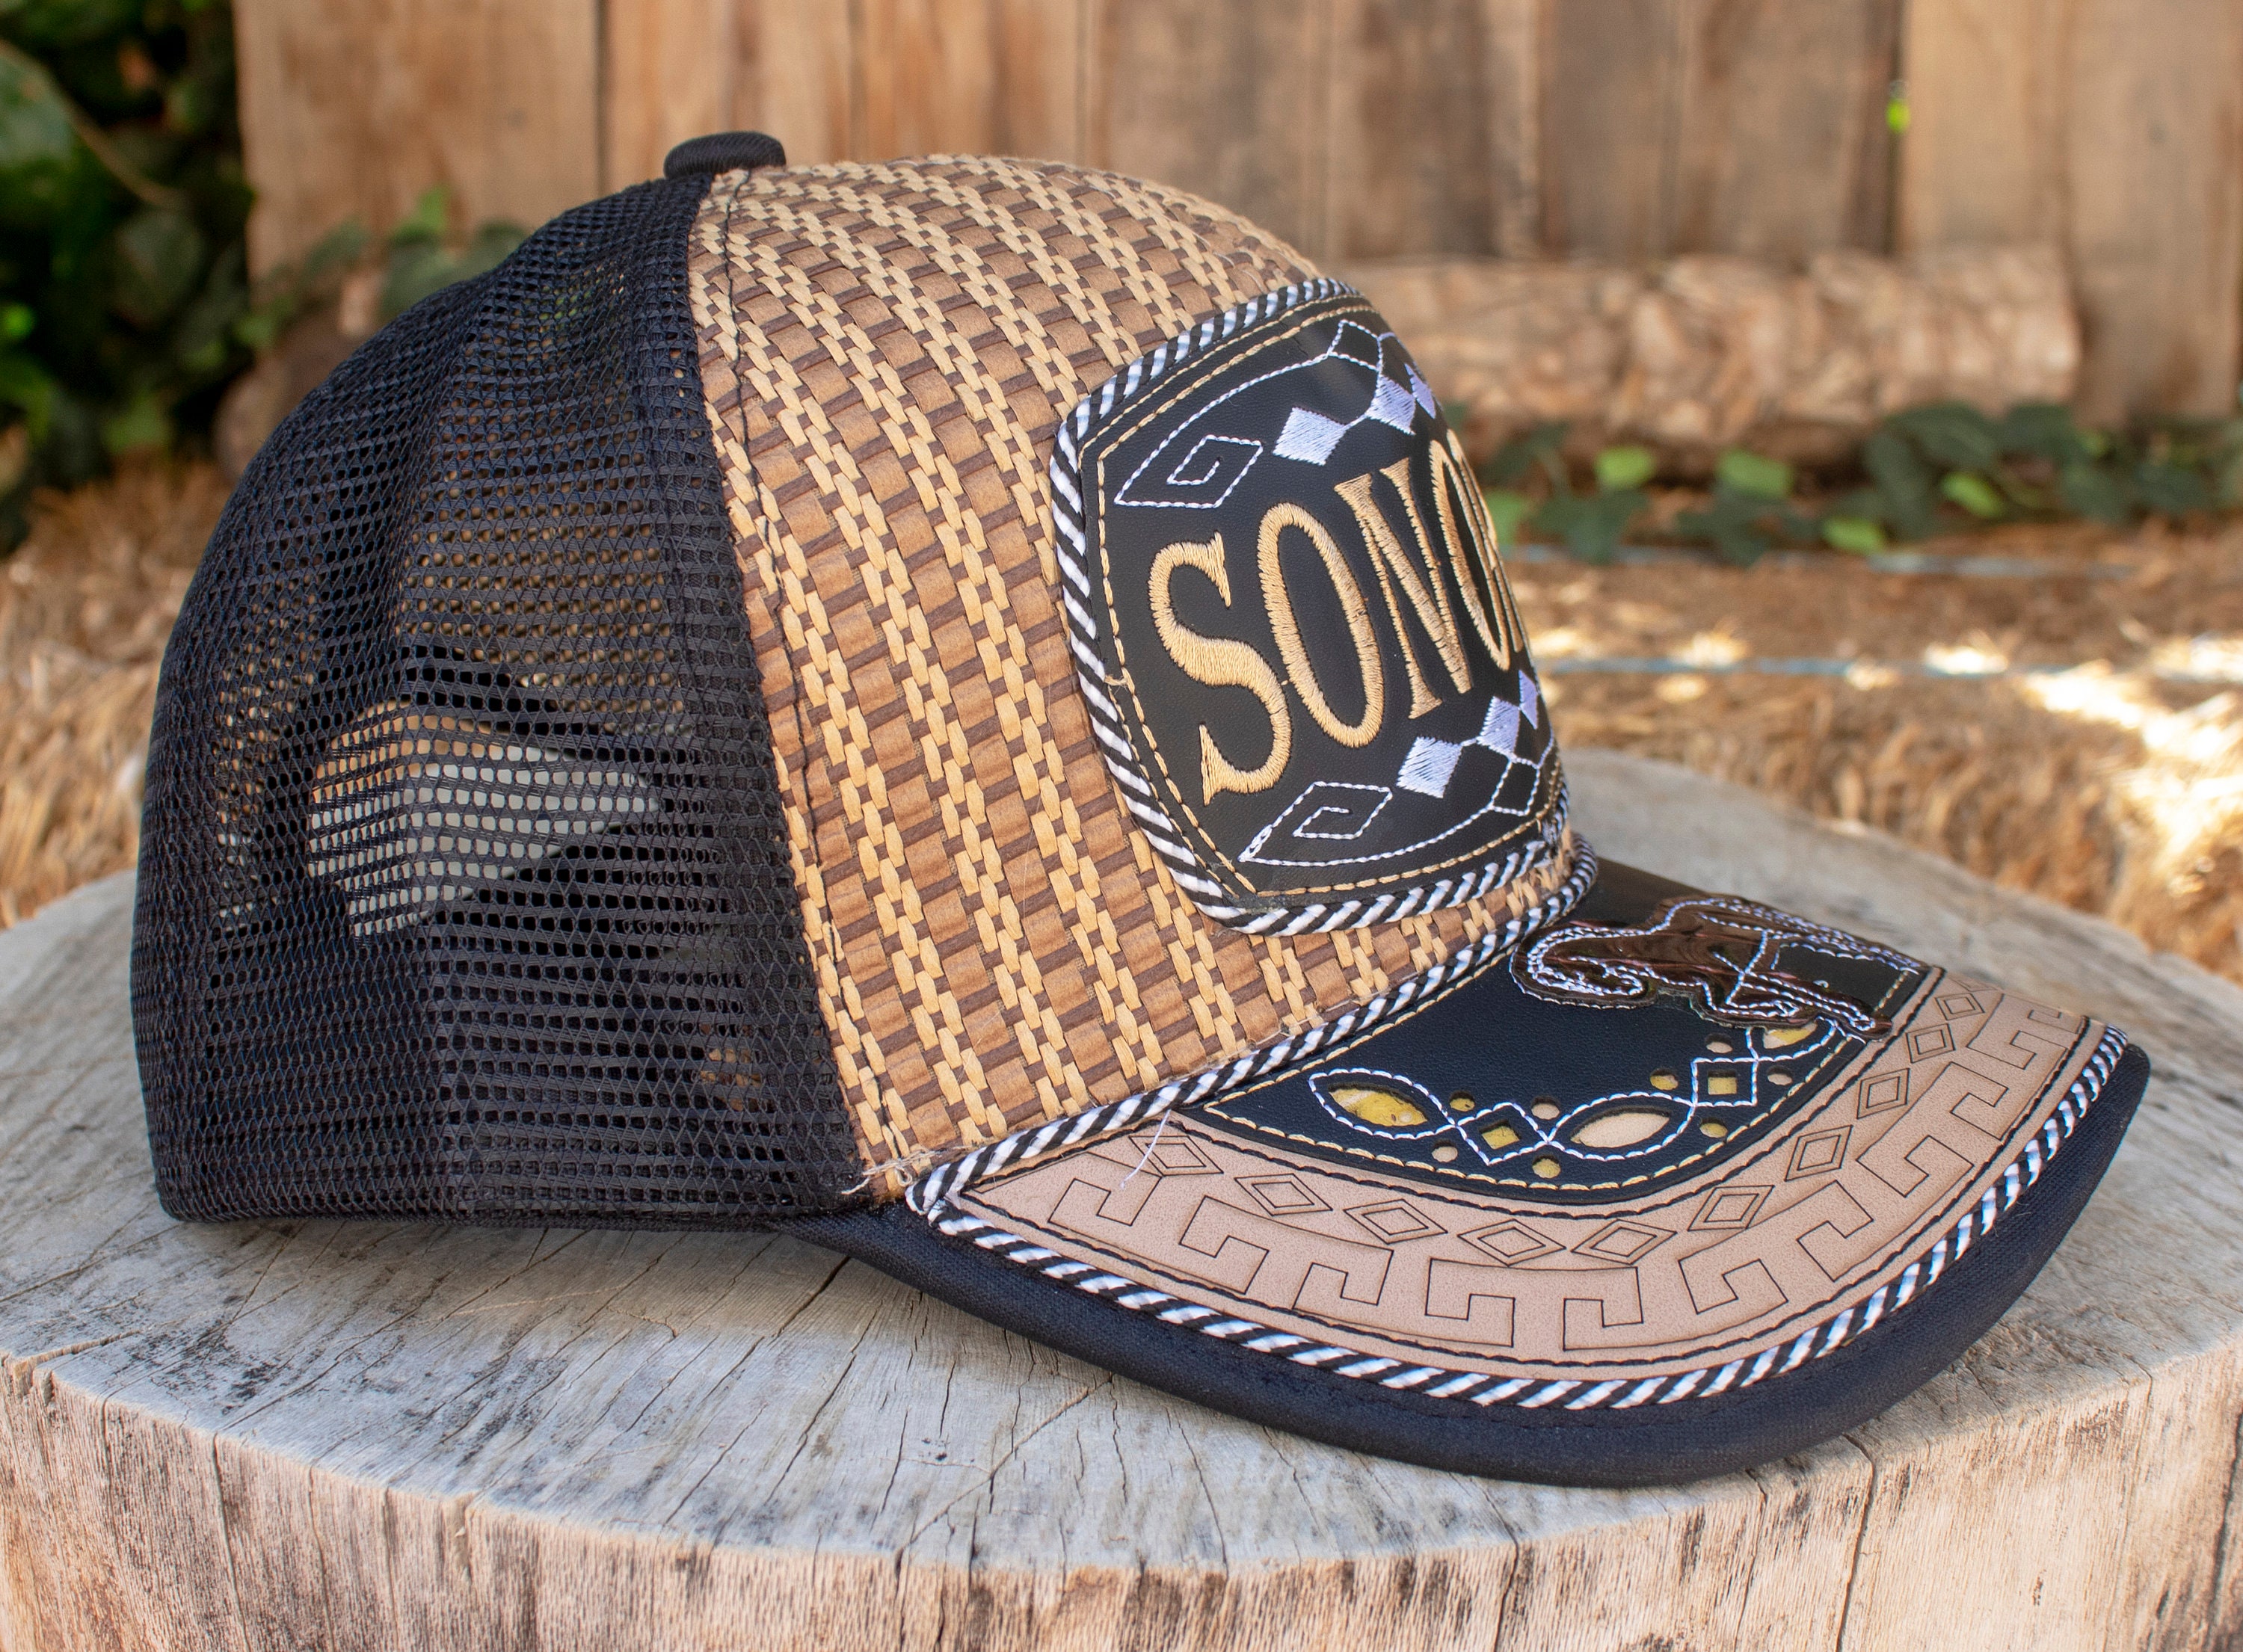 Sonora Mexico Embroidered Horse Western Rodeo Hat Adjustable Trucker Mesh Cap